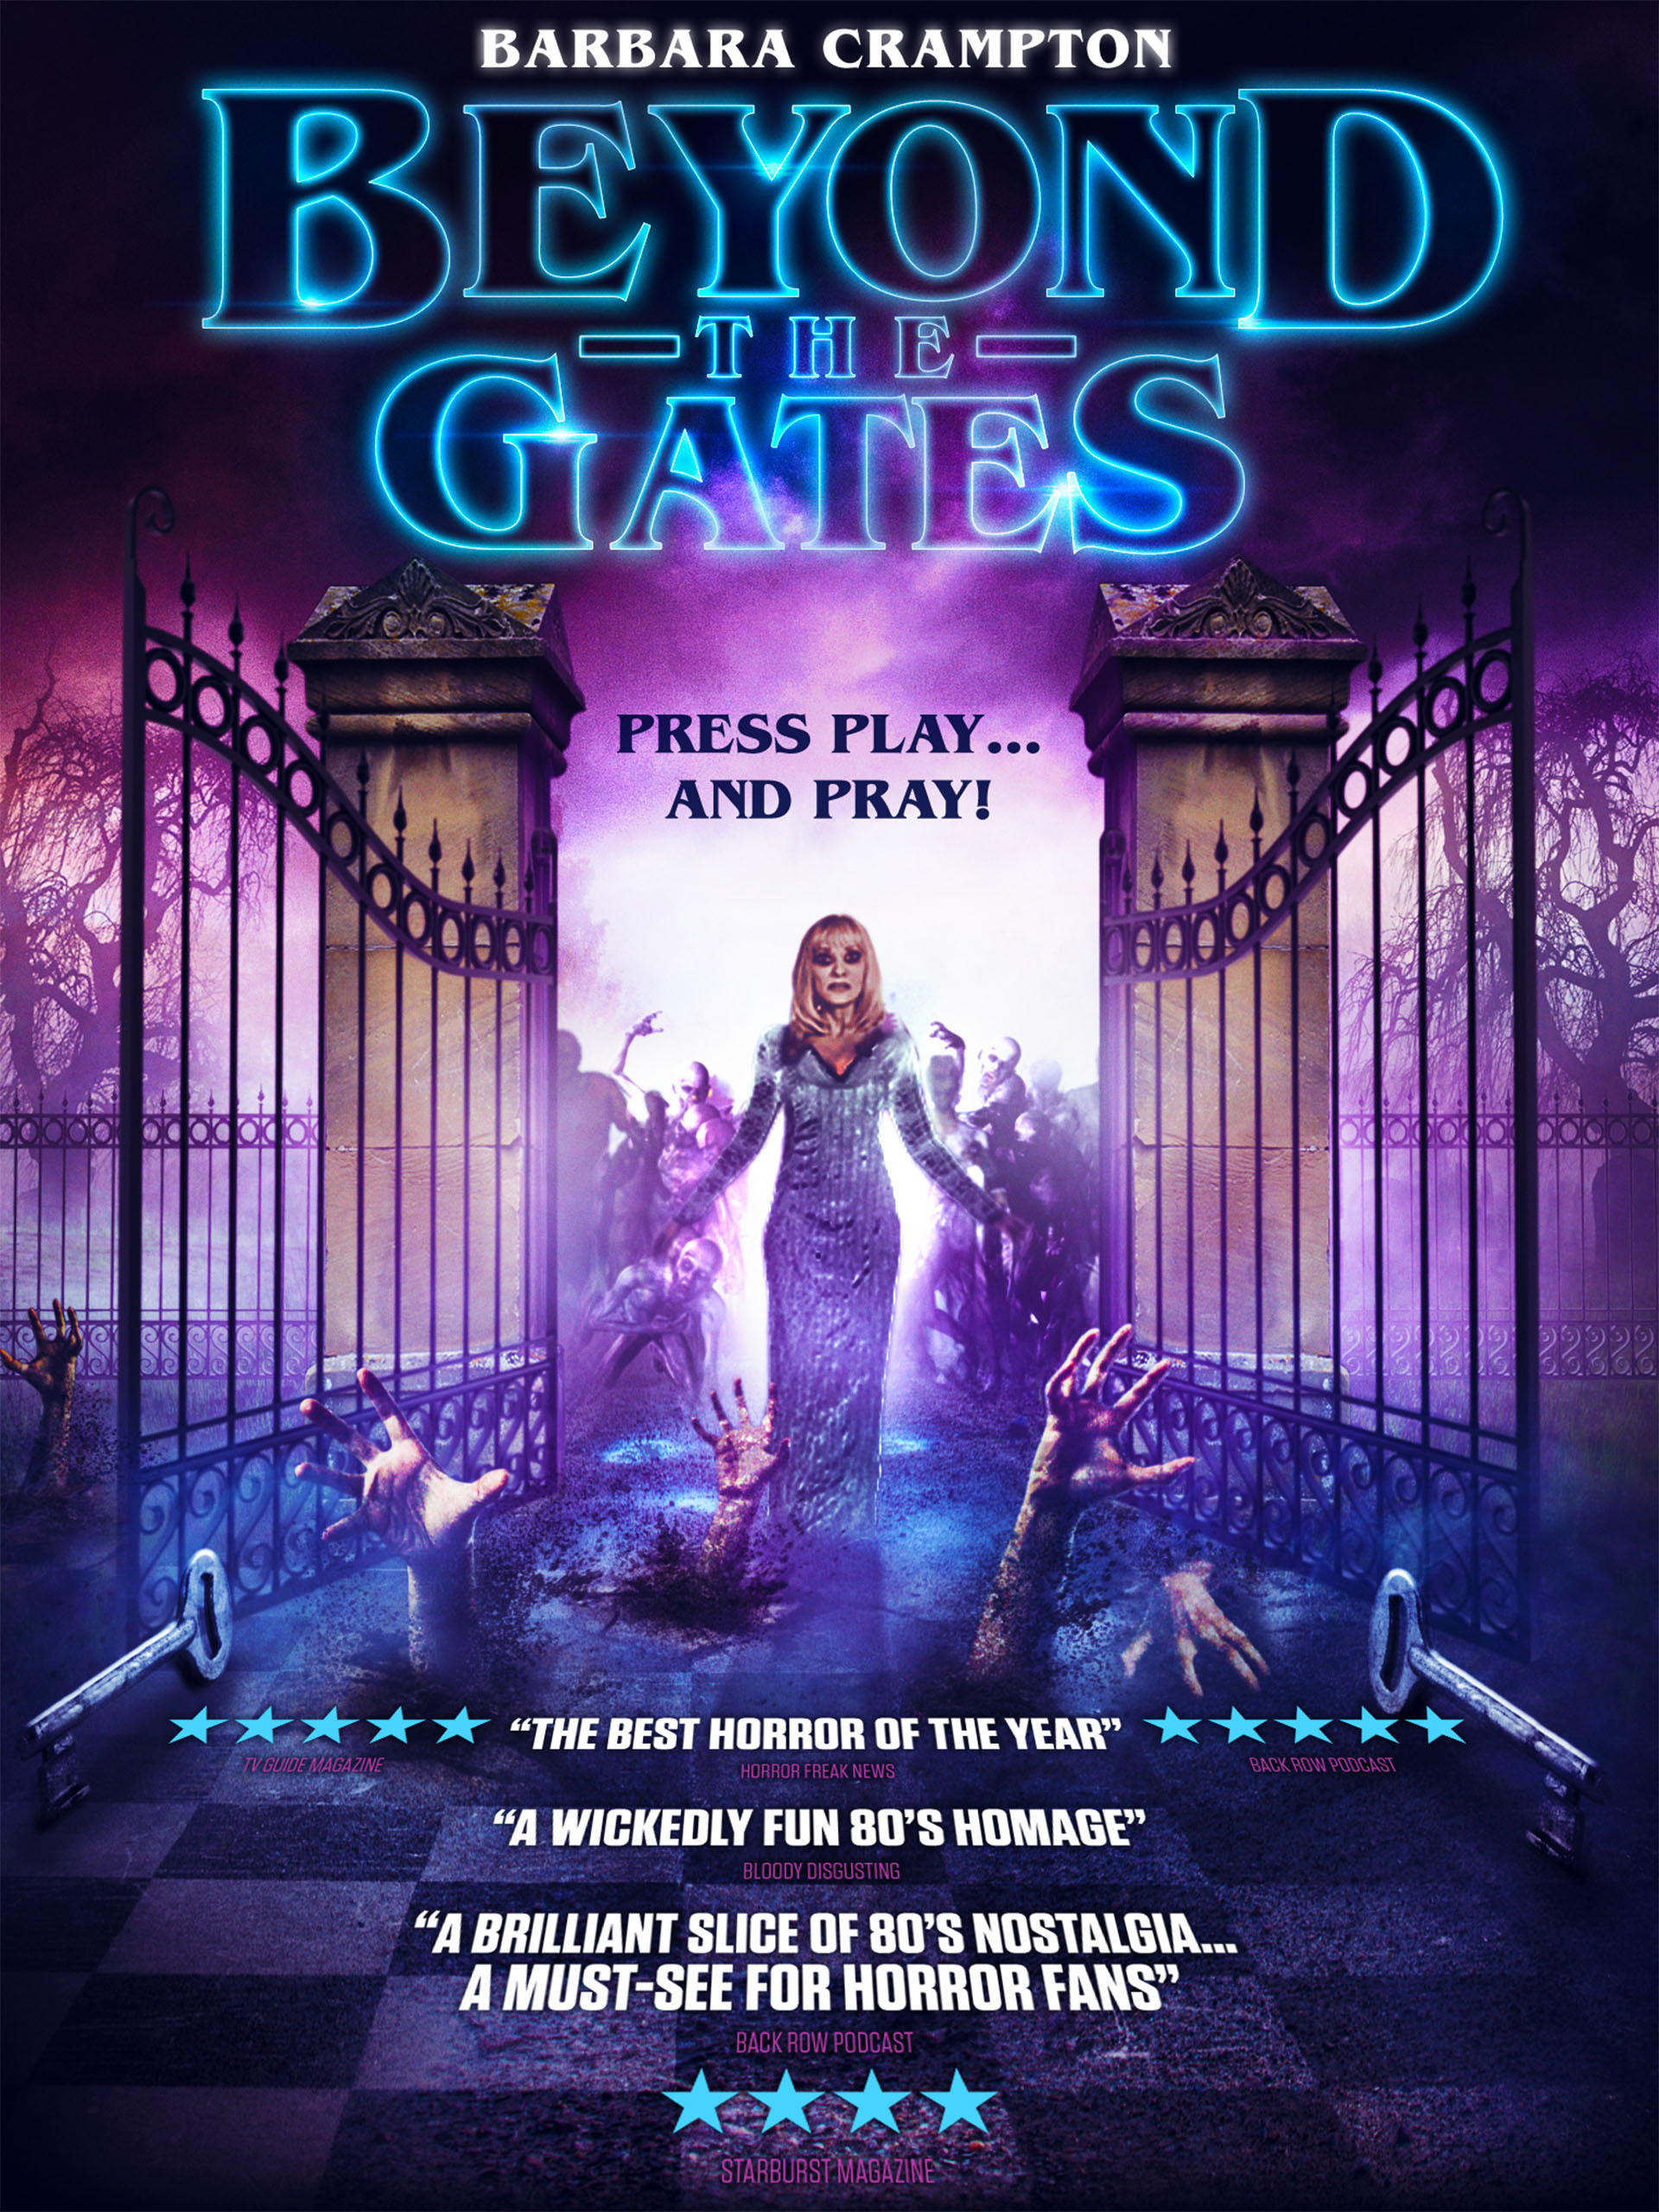 Beyond The Gates DVD review – adventure horror with heart